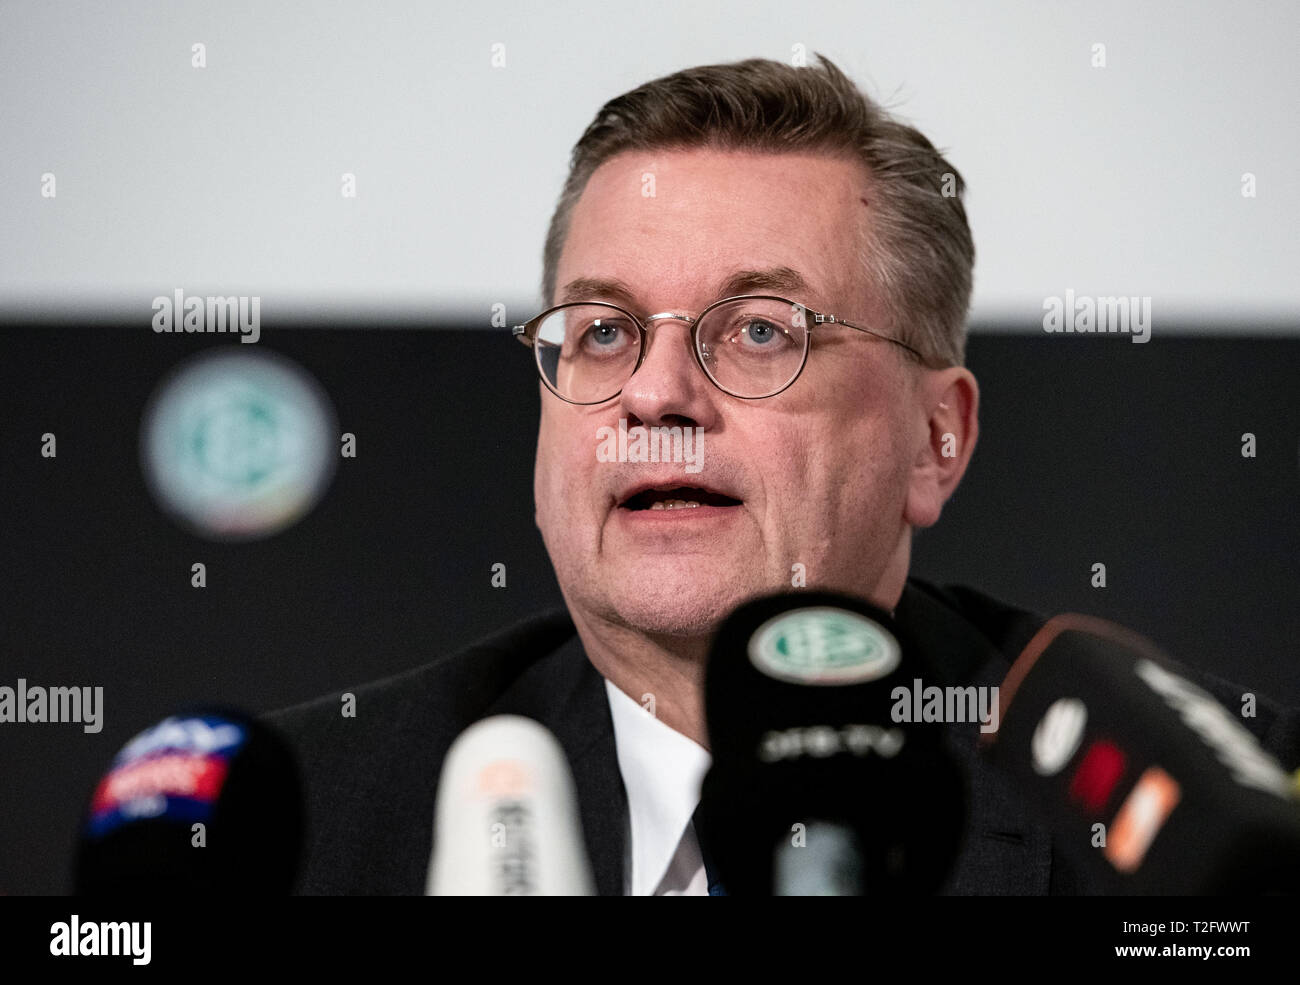 Frankfurt, Germany. 2nd Apr, 2019. President of the German Football Association (DFB) Reinhard Grindel delivers a statement during a press conference at the headquarters of DFB in Frankfurt, Germany, on April 2, 2019. Reinhard Grindel has resigned after allegations of undeclared earnings, the DFB have confirmed in an official statement on Tuesday. Credit: Florian Ulrich/Xinhua/Alamy Live News Stock Photo